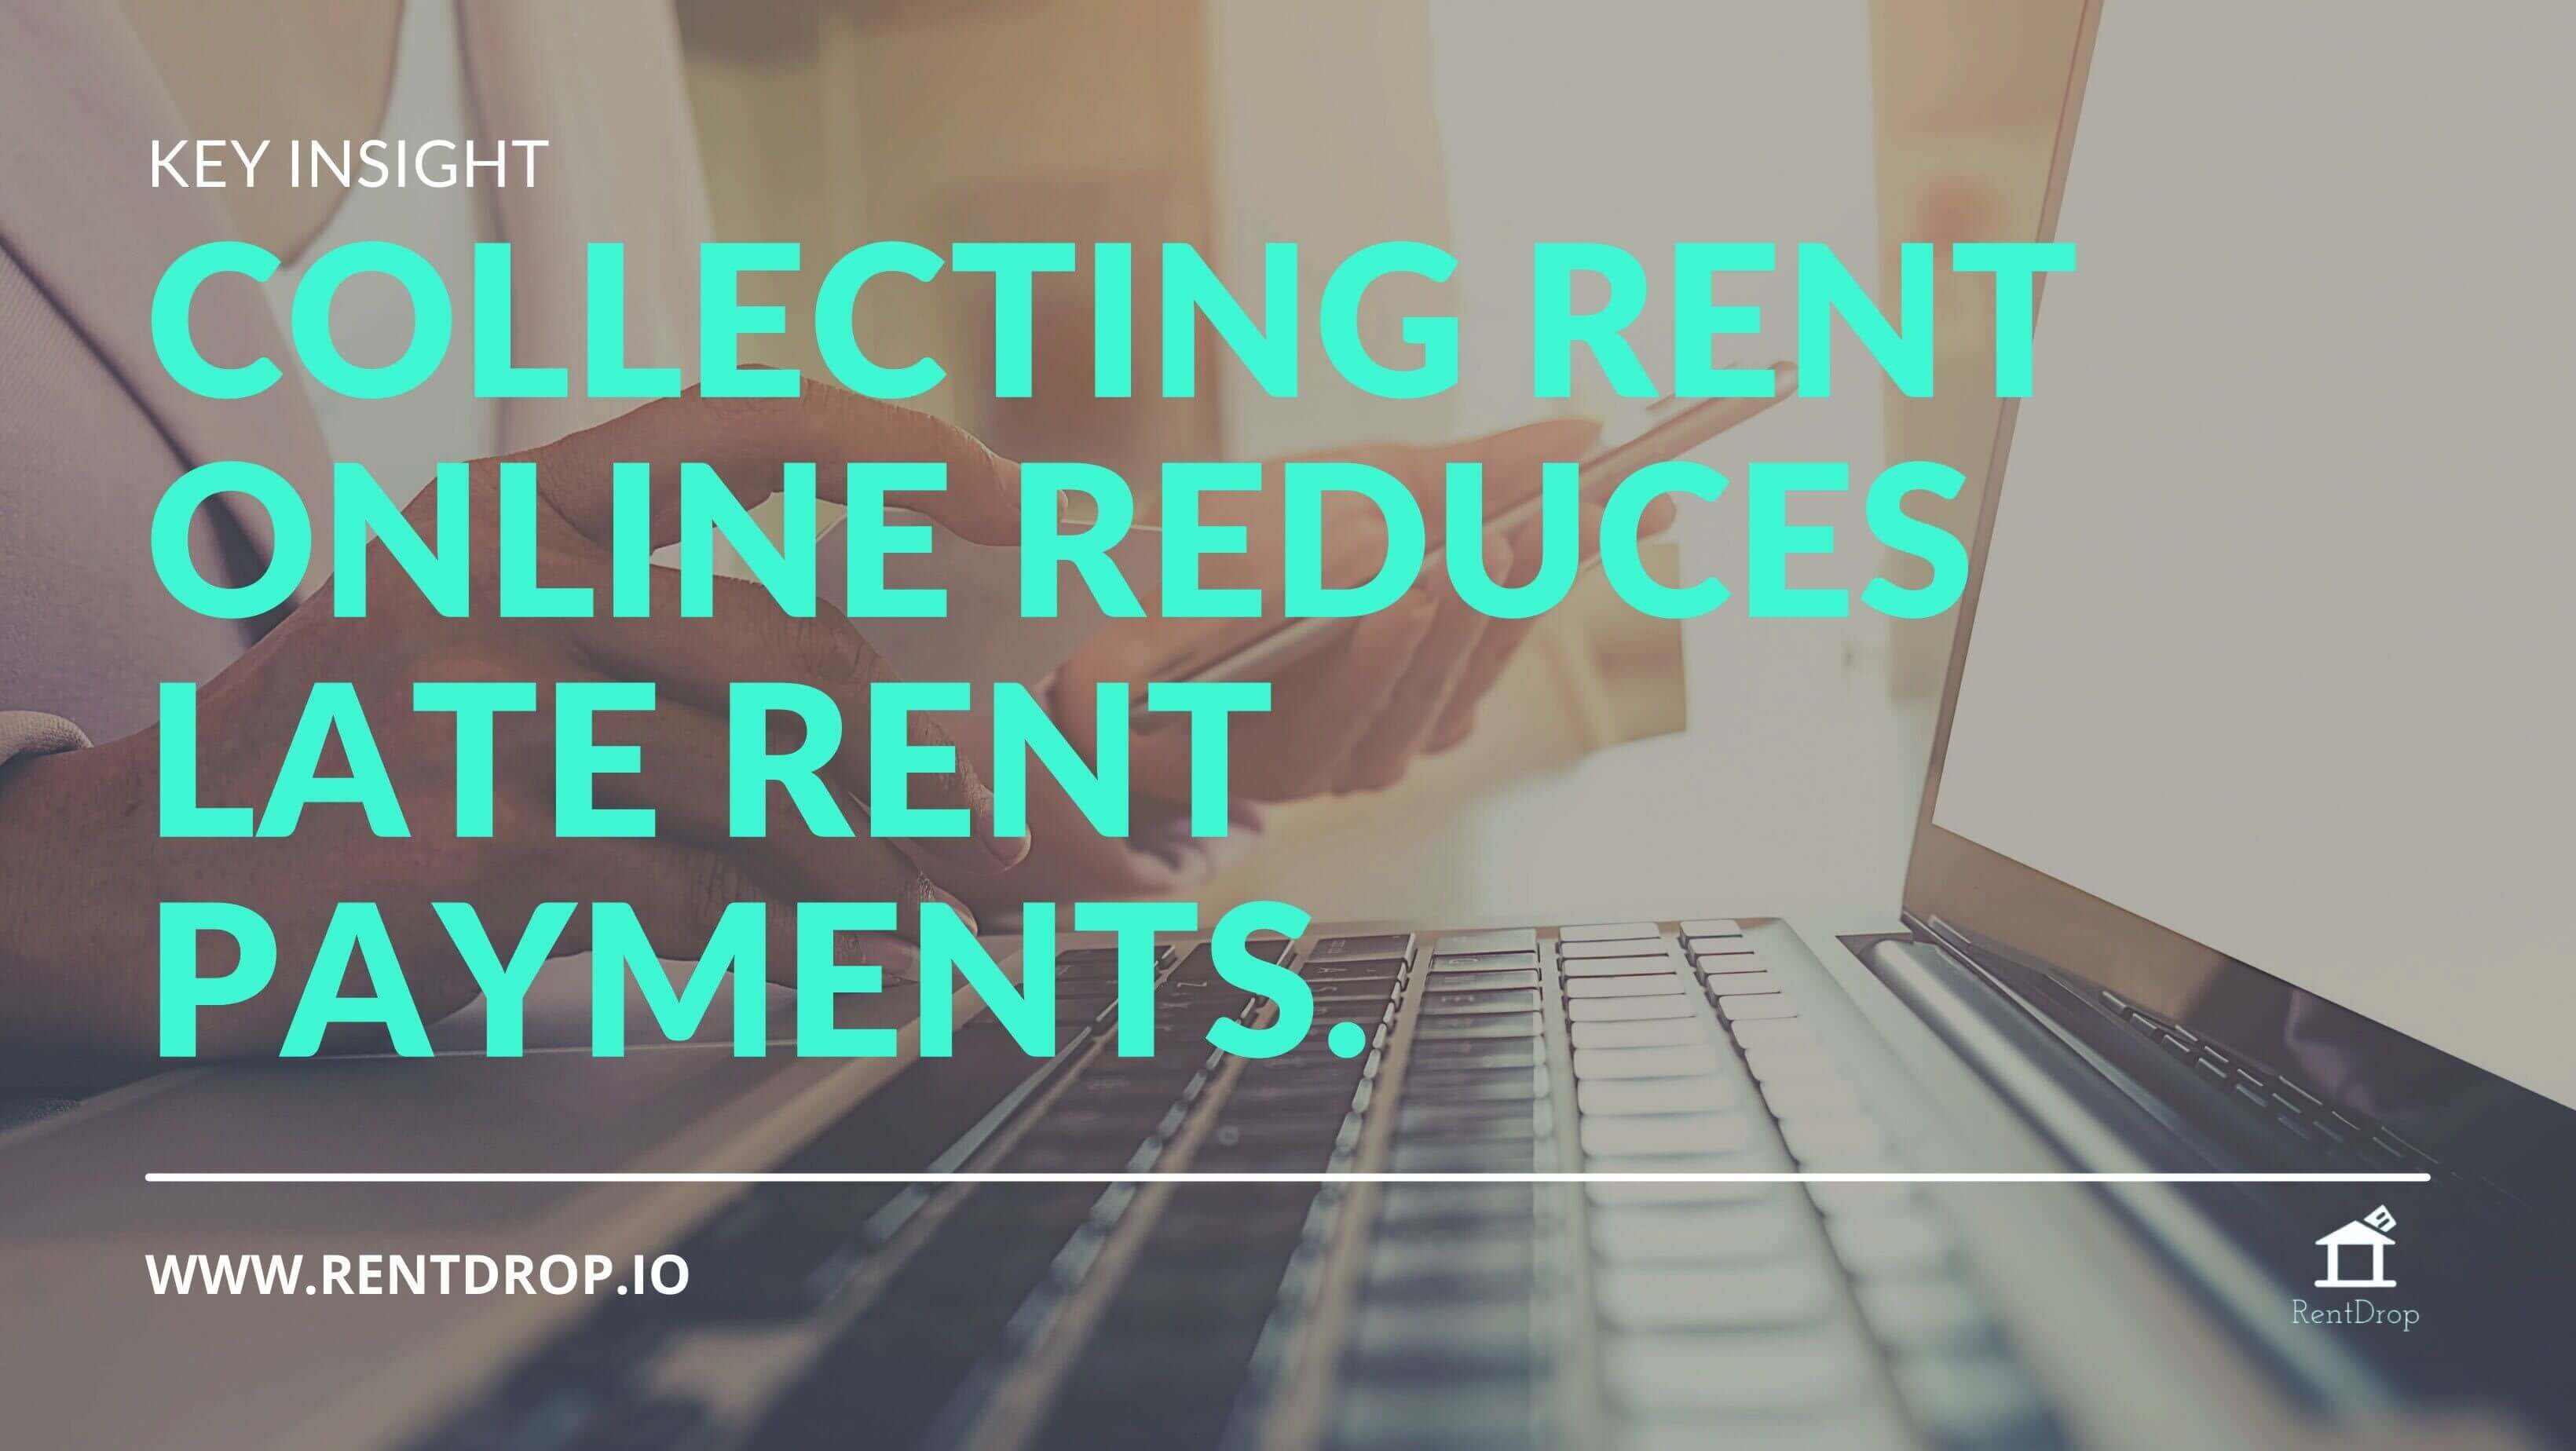 41 -  Key insight Pay Rent Online